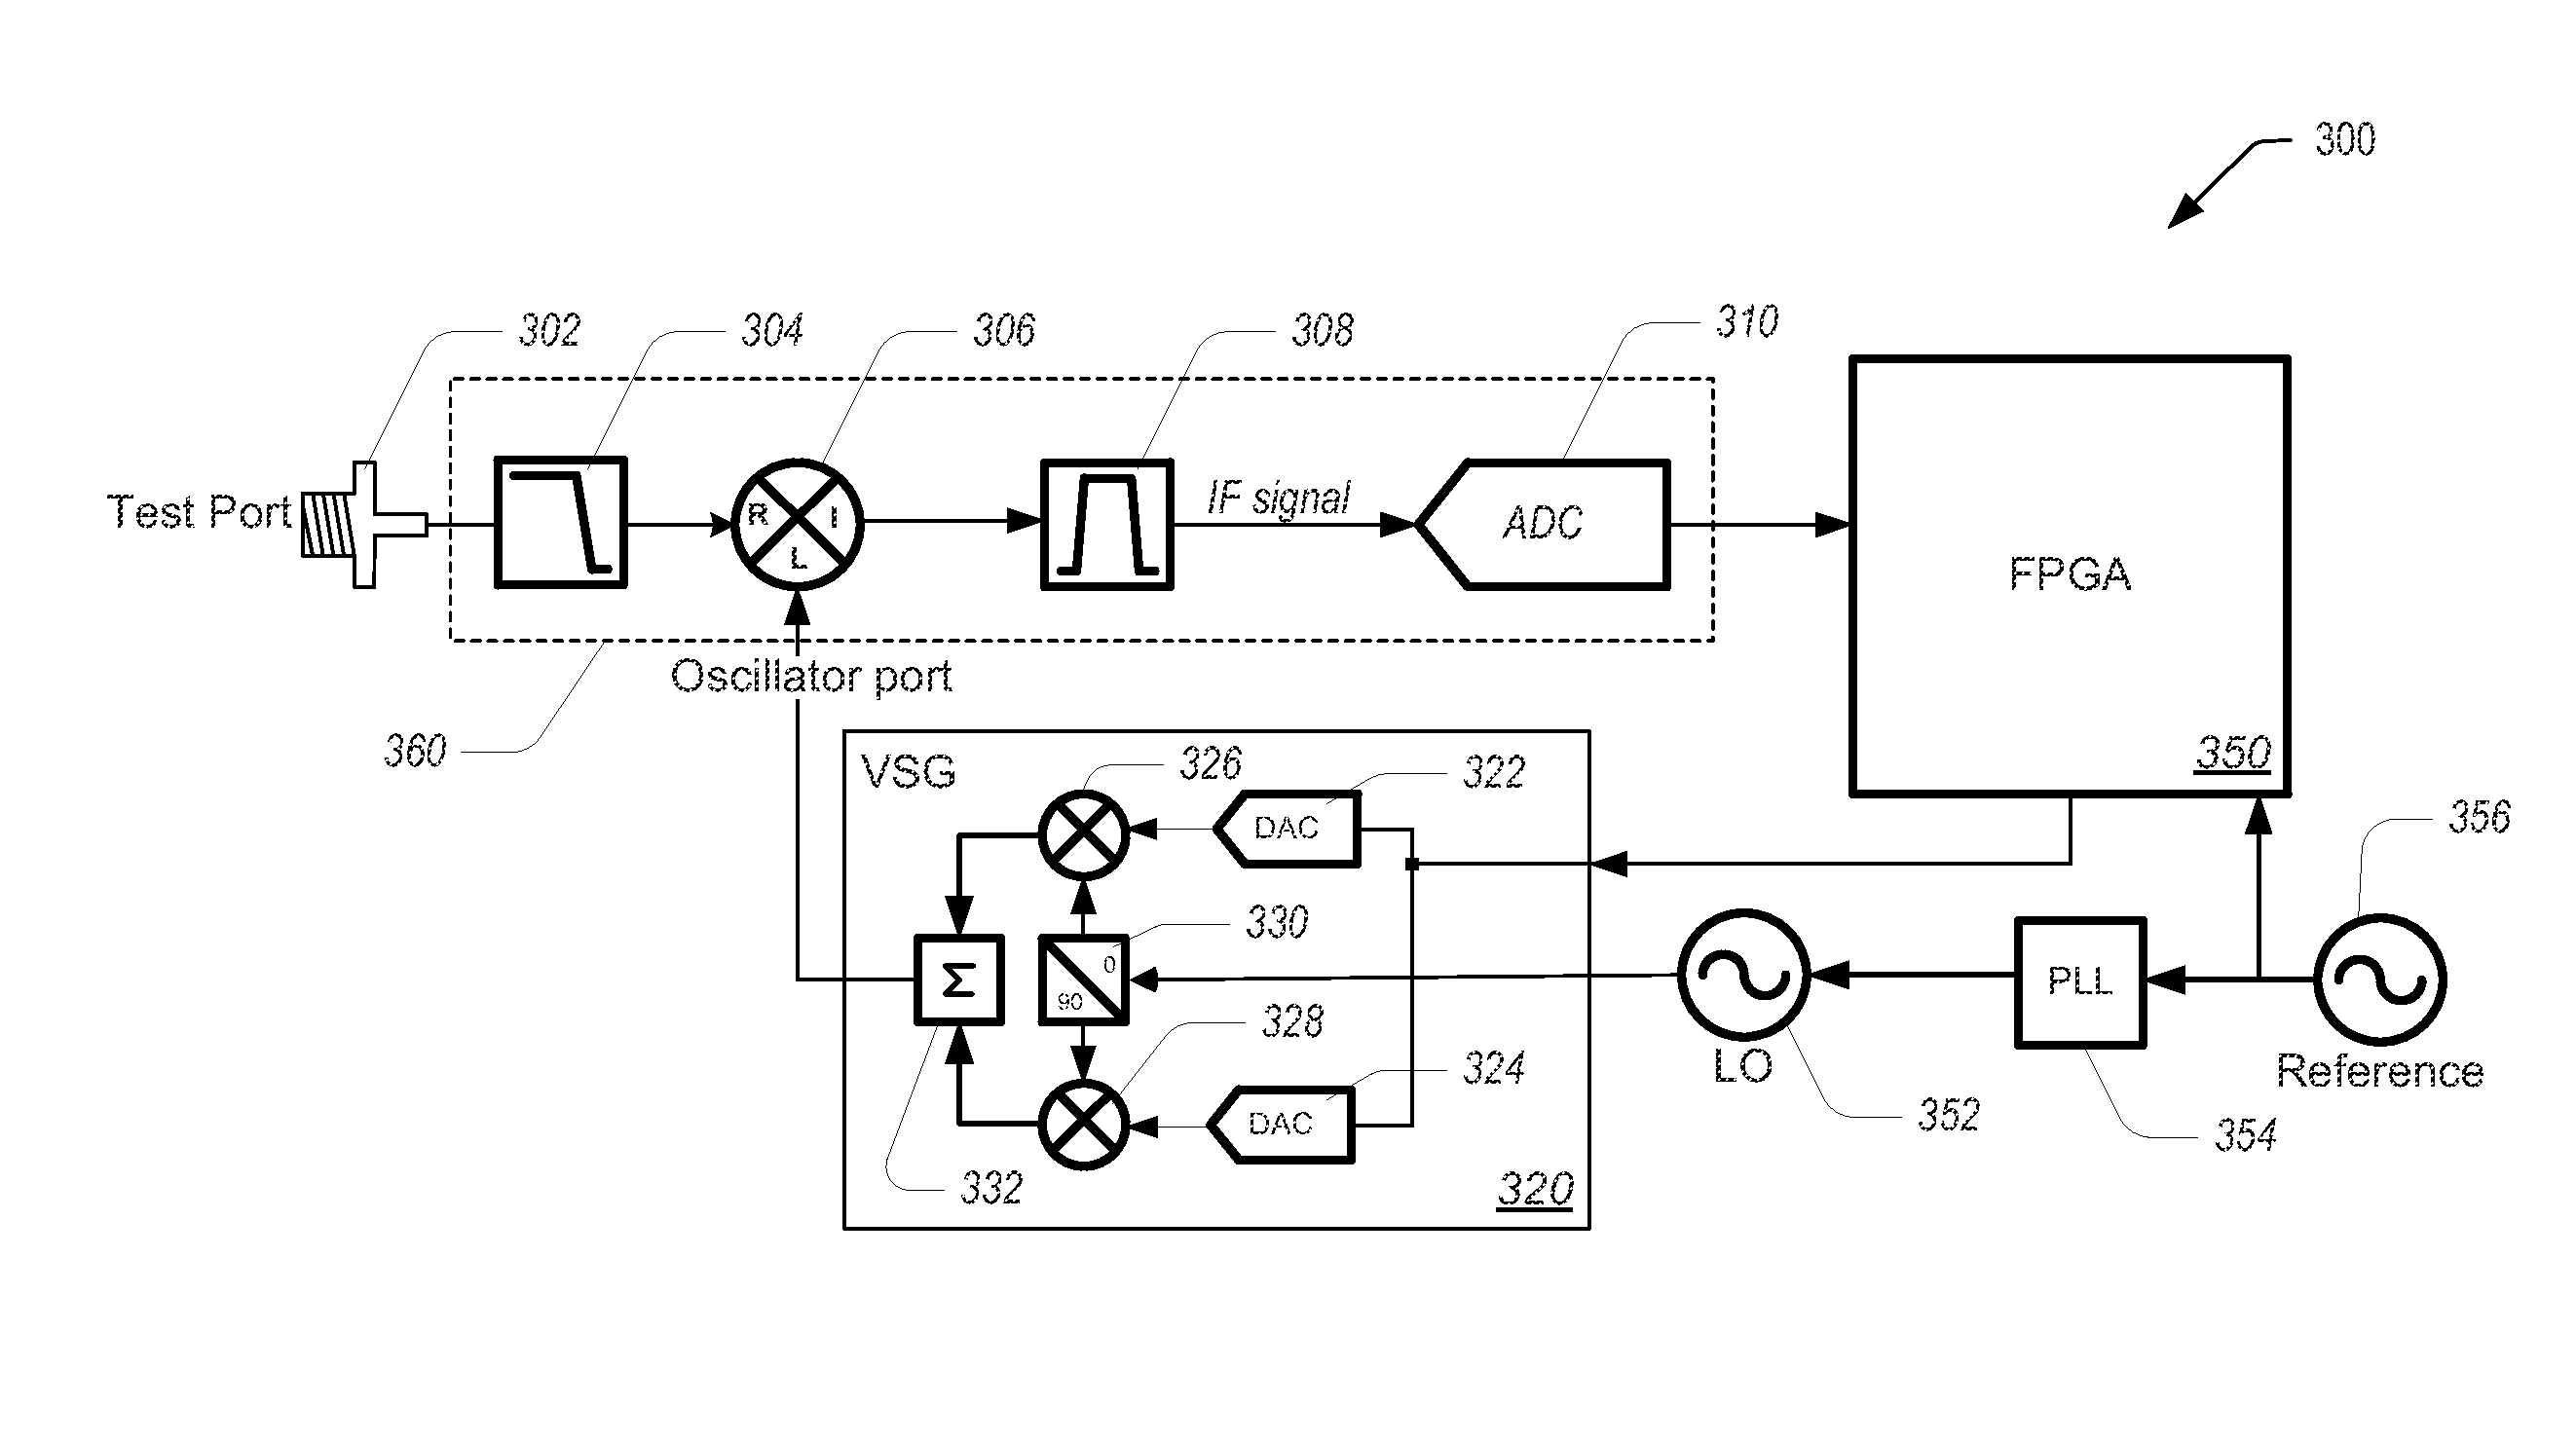 Measurement system utilizing a frequency-dithered local oscillator